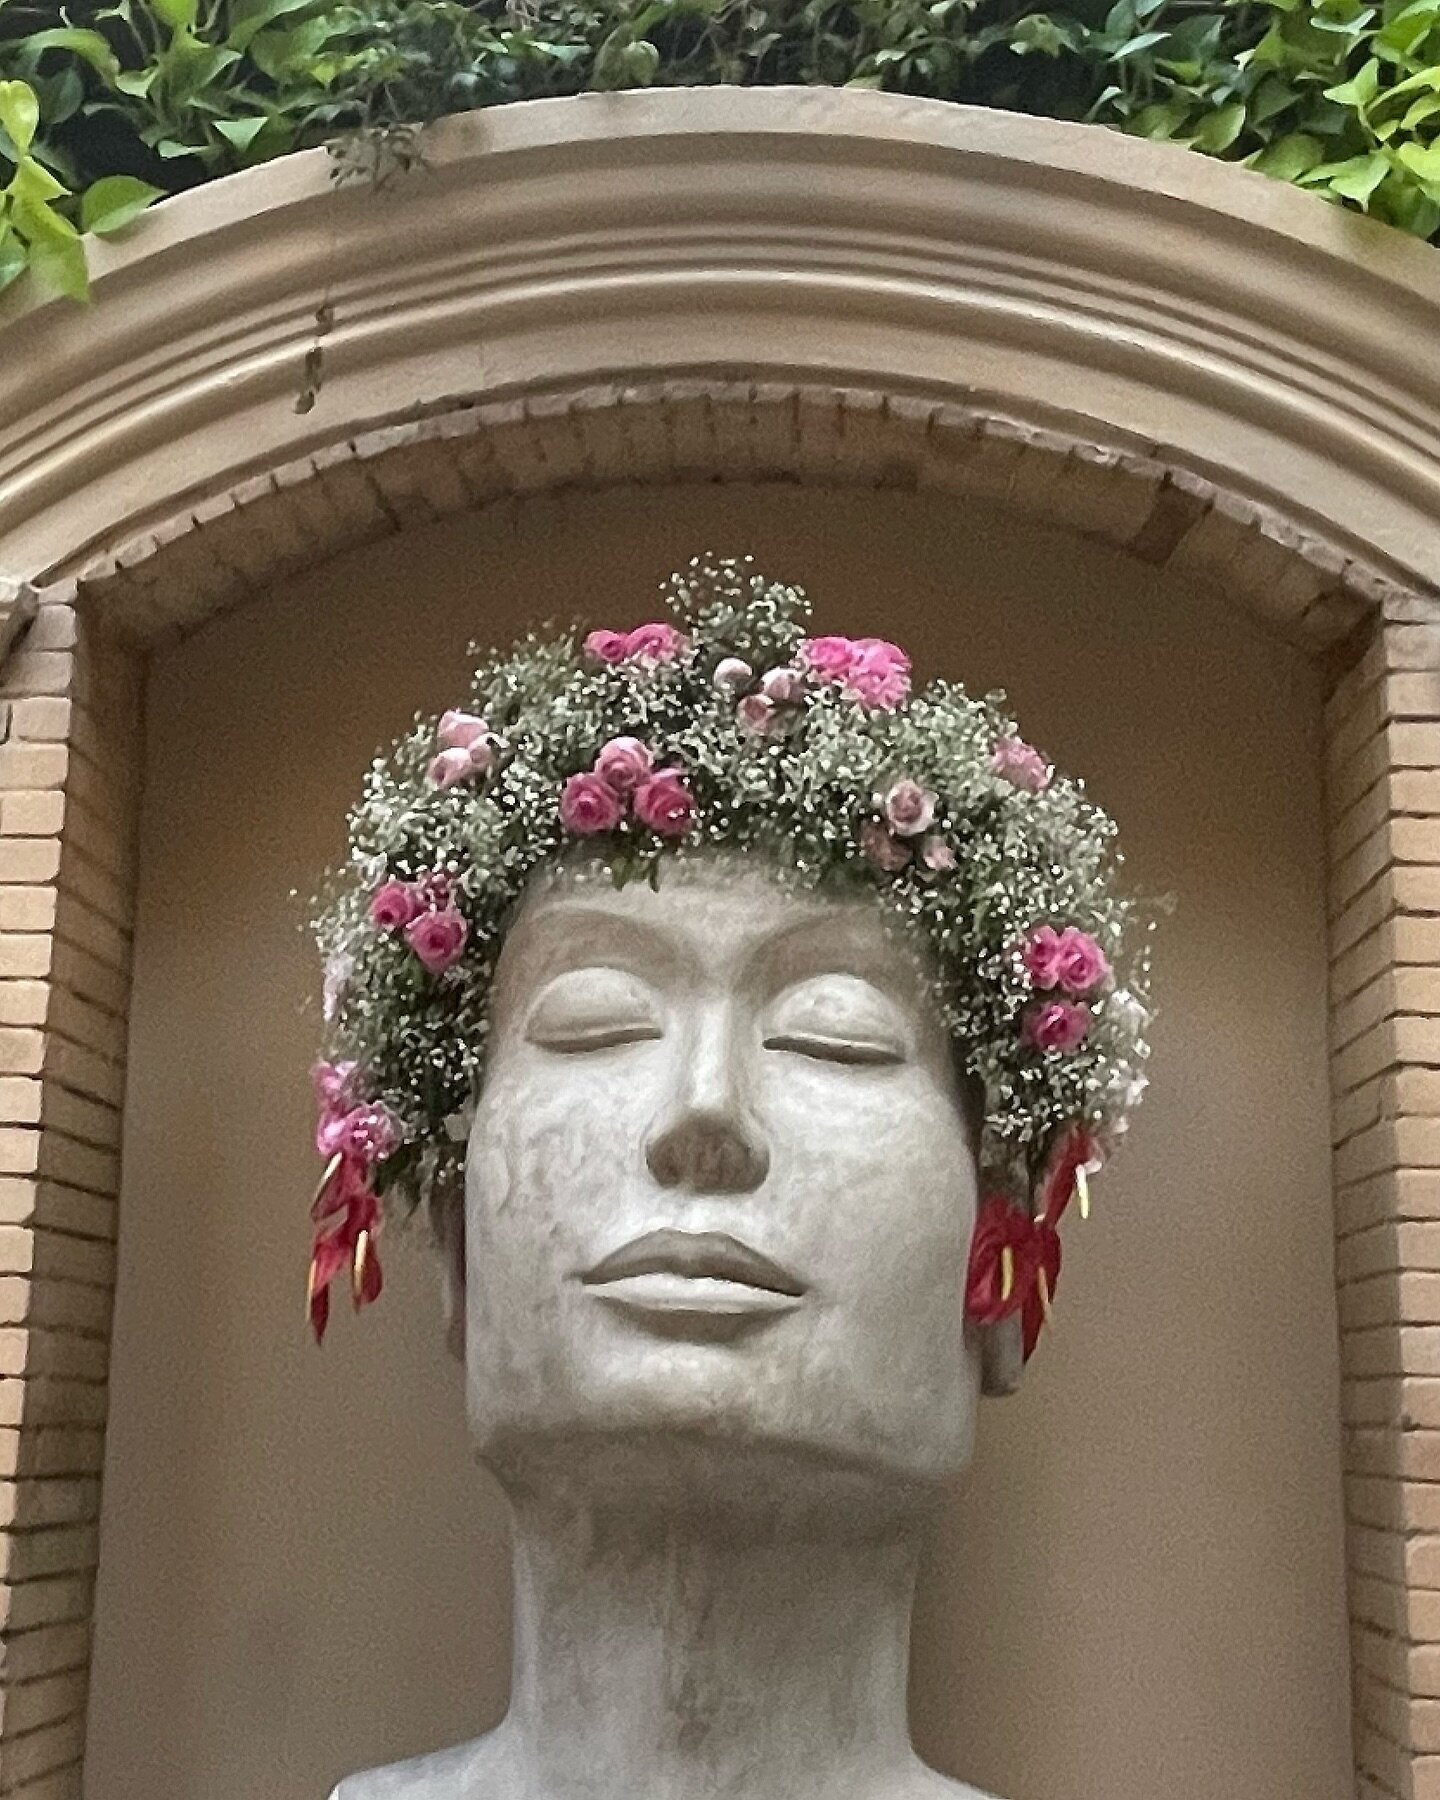 A lovely afternoon spent  @one8.commune and my gaze caught  this beautiful  head sculpture with an inspiring &lsquo;flower crown&rsquo; , did someone say wedding season? 
#weddingheaddress #weddingflowers #floralheaddress